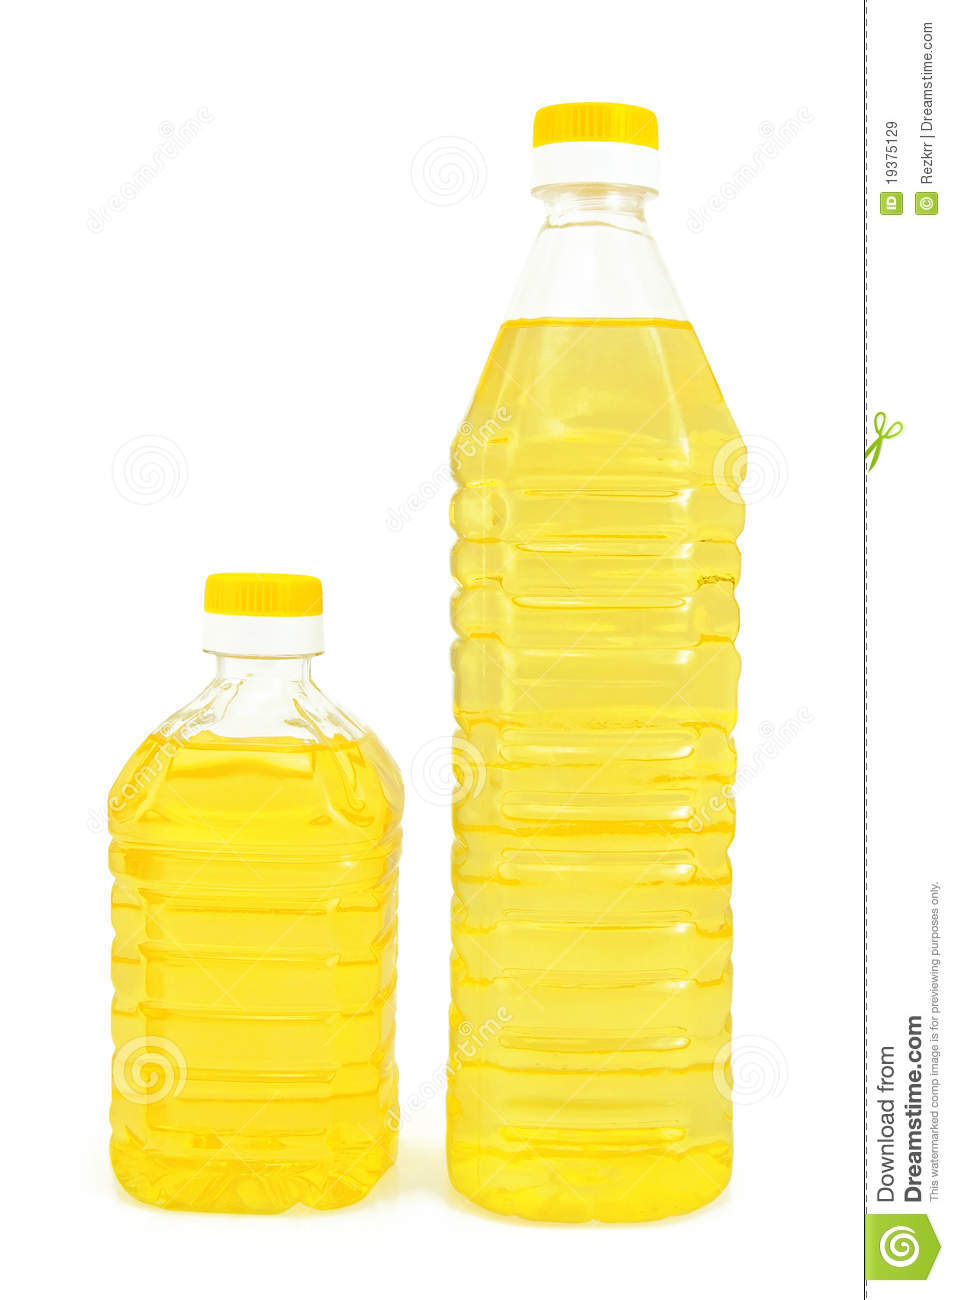 cooking oil clipart - photo #19